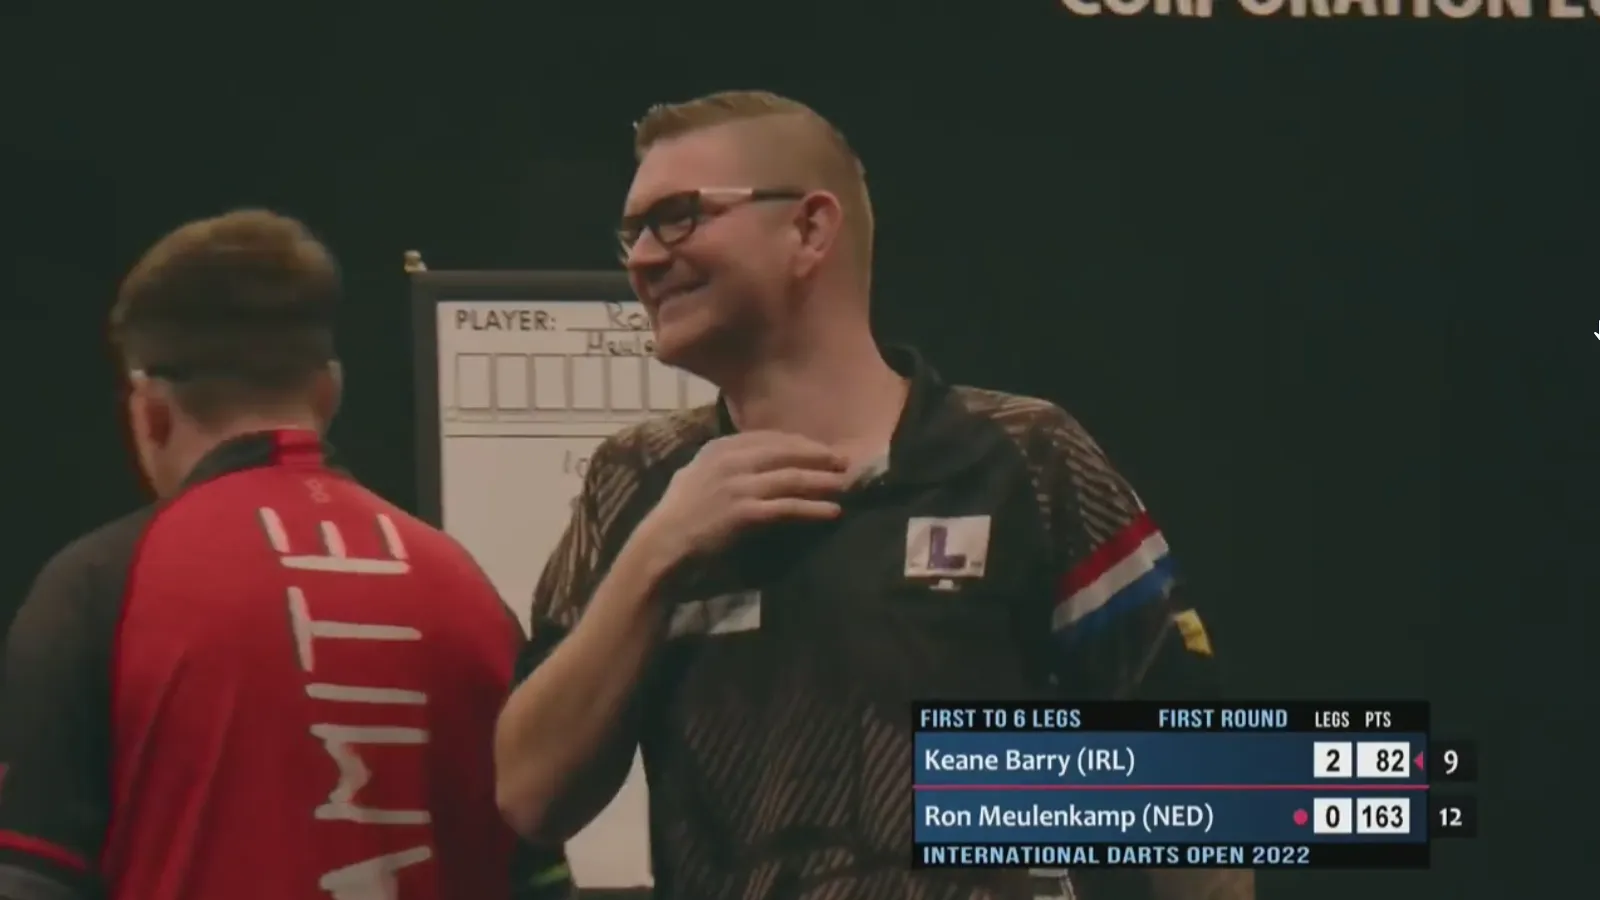 2022 02 25 18 09 00 PDC Darts on Twitter   𝗪𝗛𝗔𝗧𝗦 𝗛𝗘 𝗗𝗢𝗜𝗡𝗚 !  🤯 A moment of madness fr